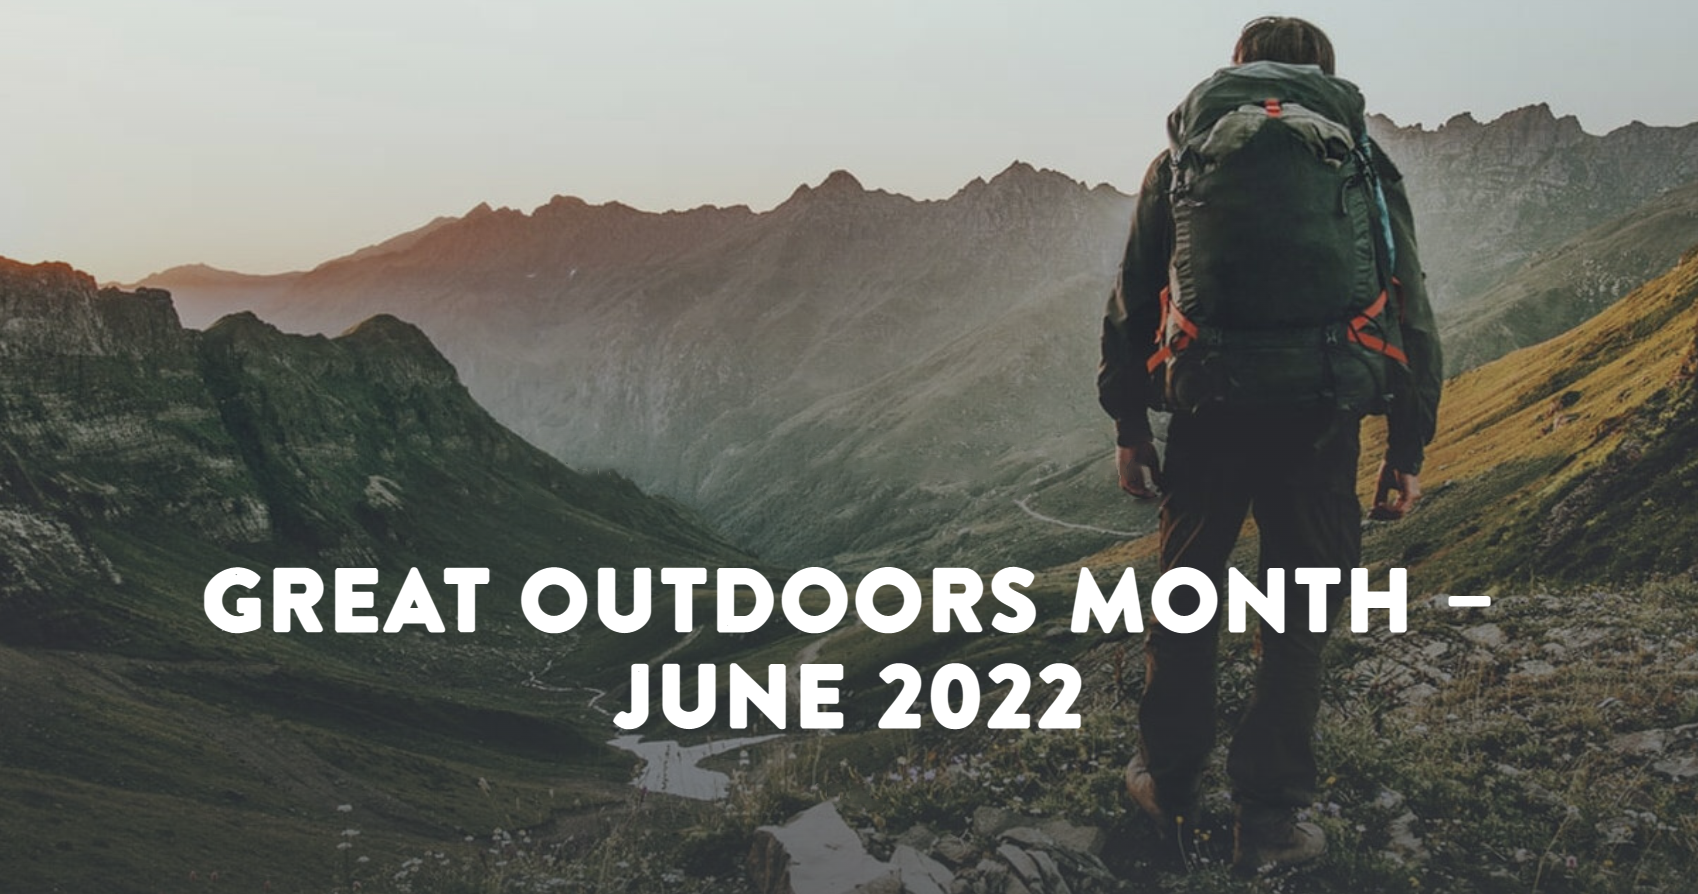 Great Outdoors Month June 2022 Banner